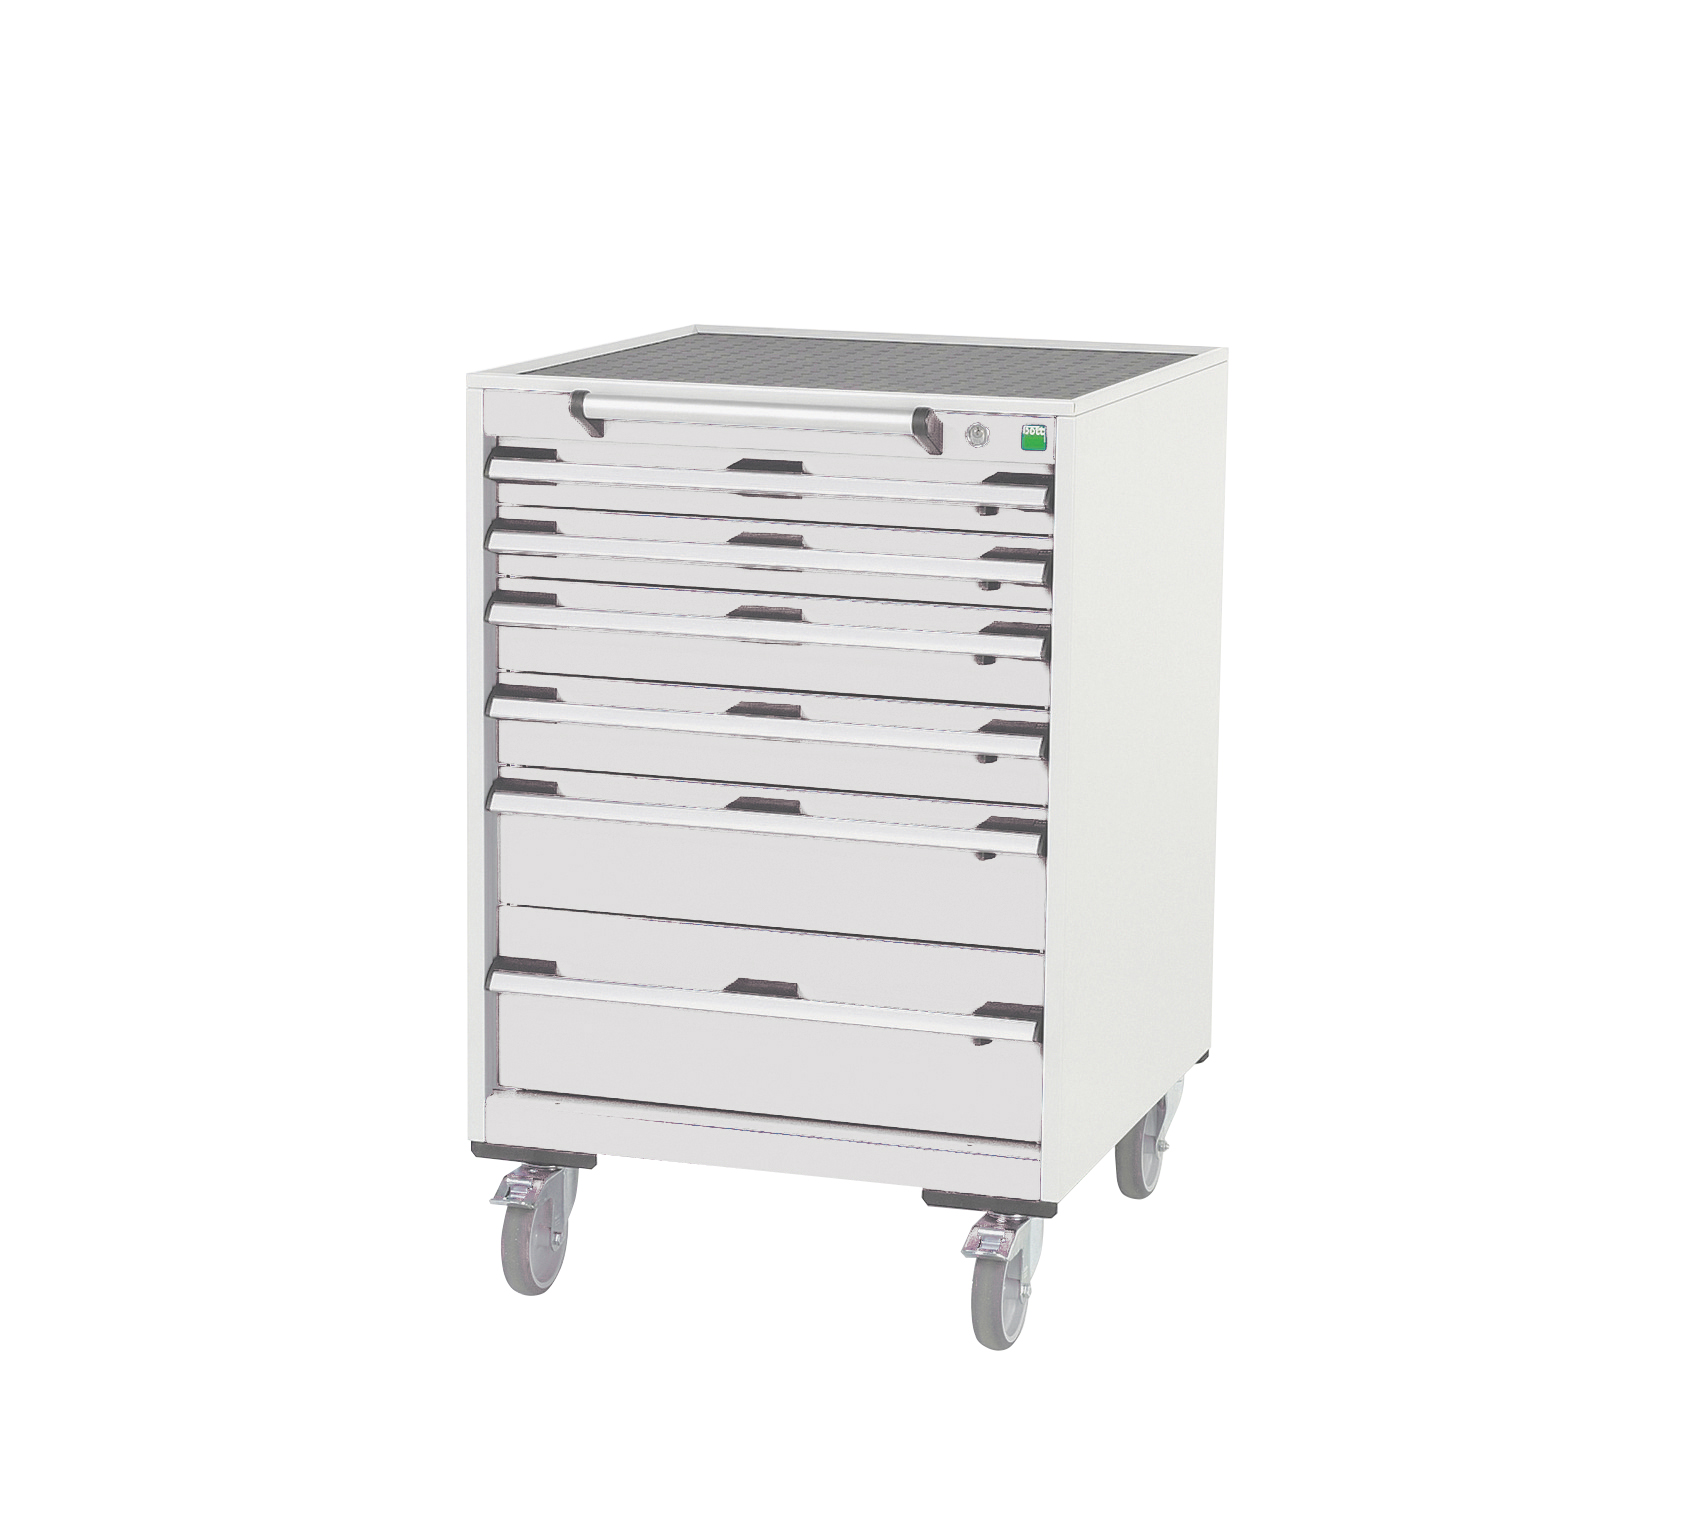 Bott Cubio Mobile Drawer Cabinet With 6 Drawers & Top Tray With Mat - 40402035.16V